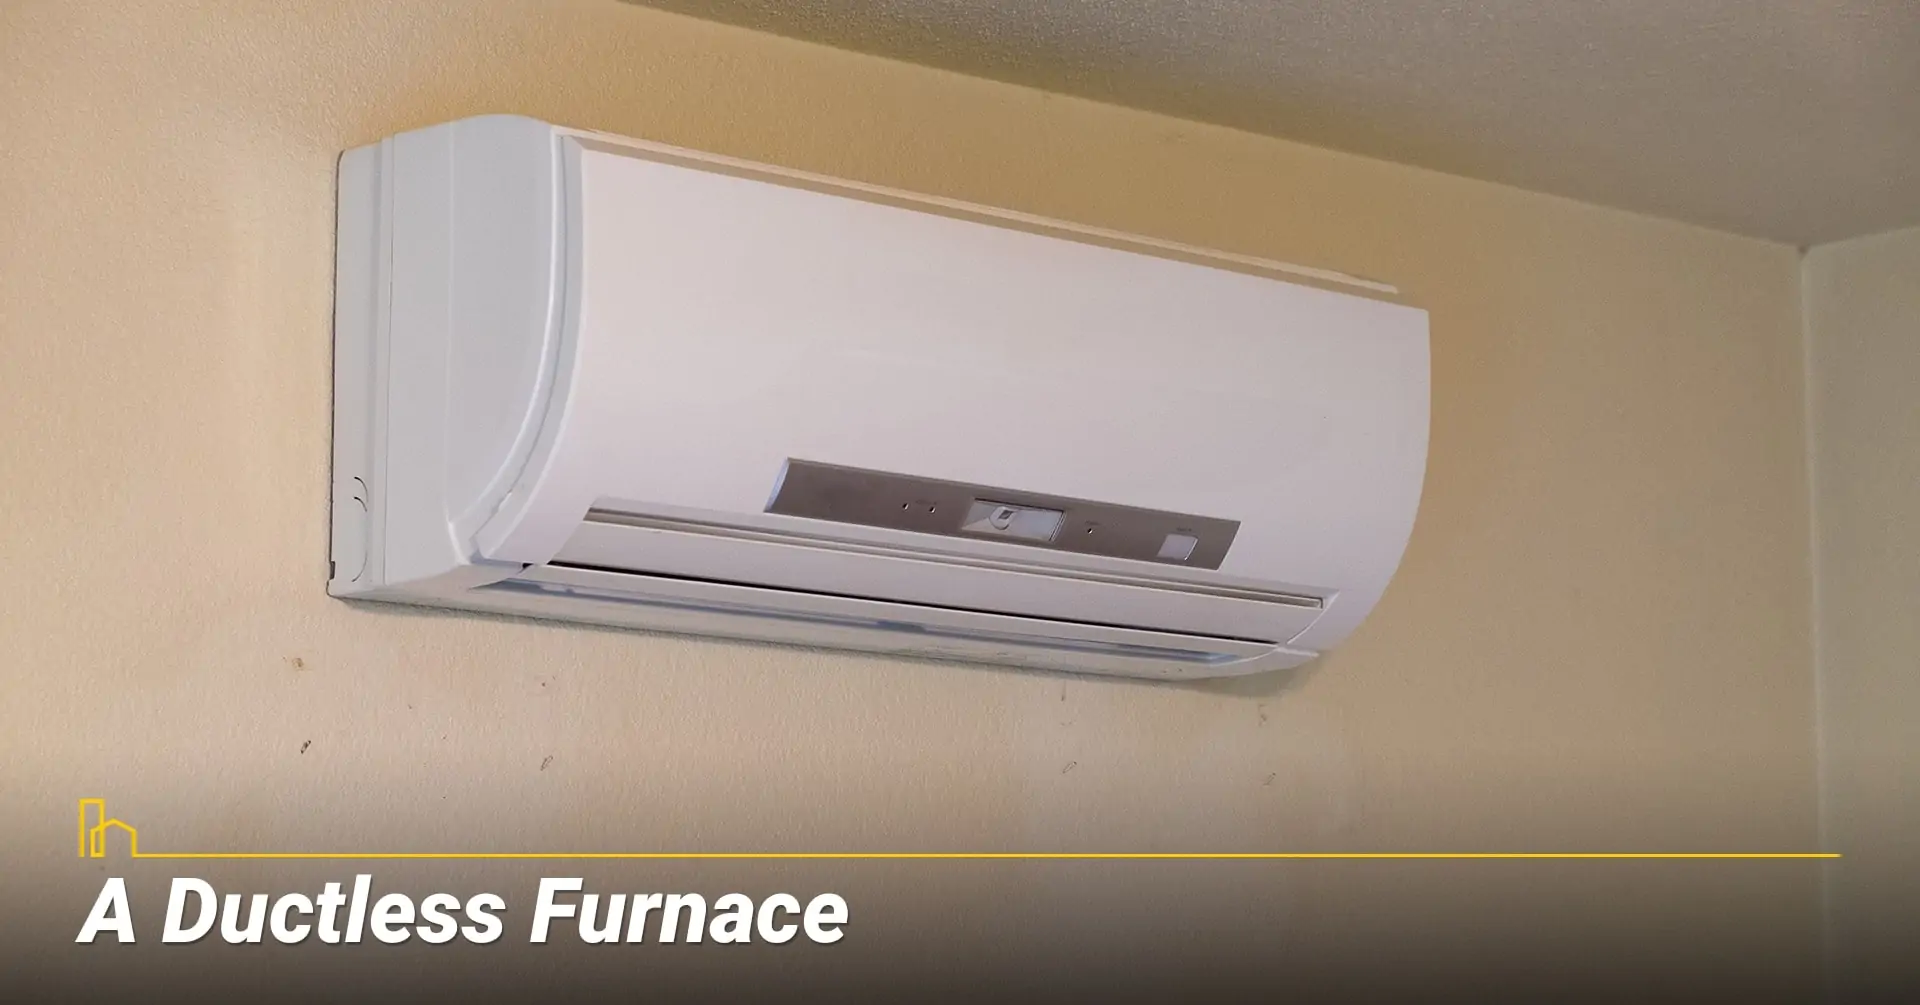 A Ductless Furnace, heat your home with ductless furnace